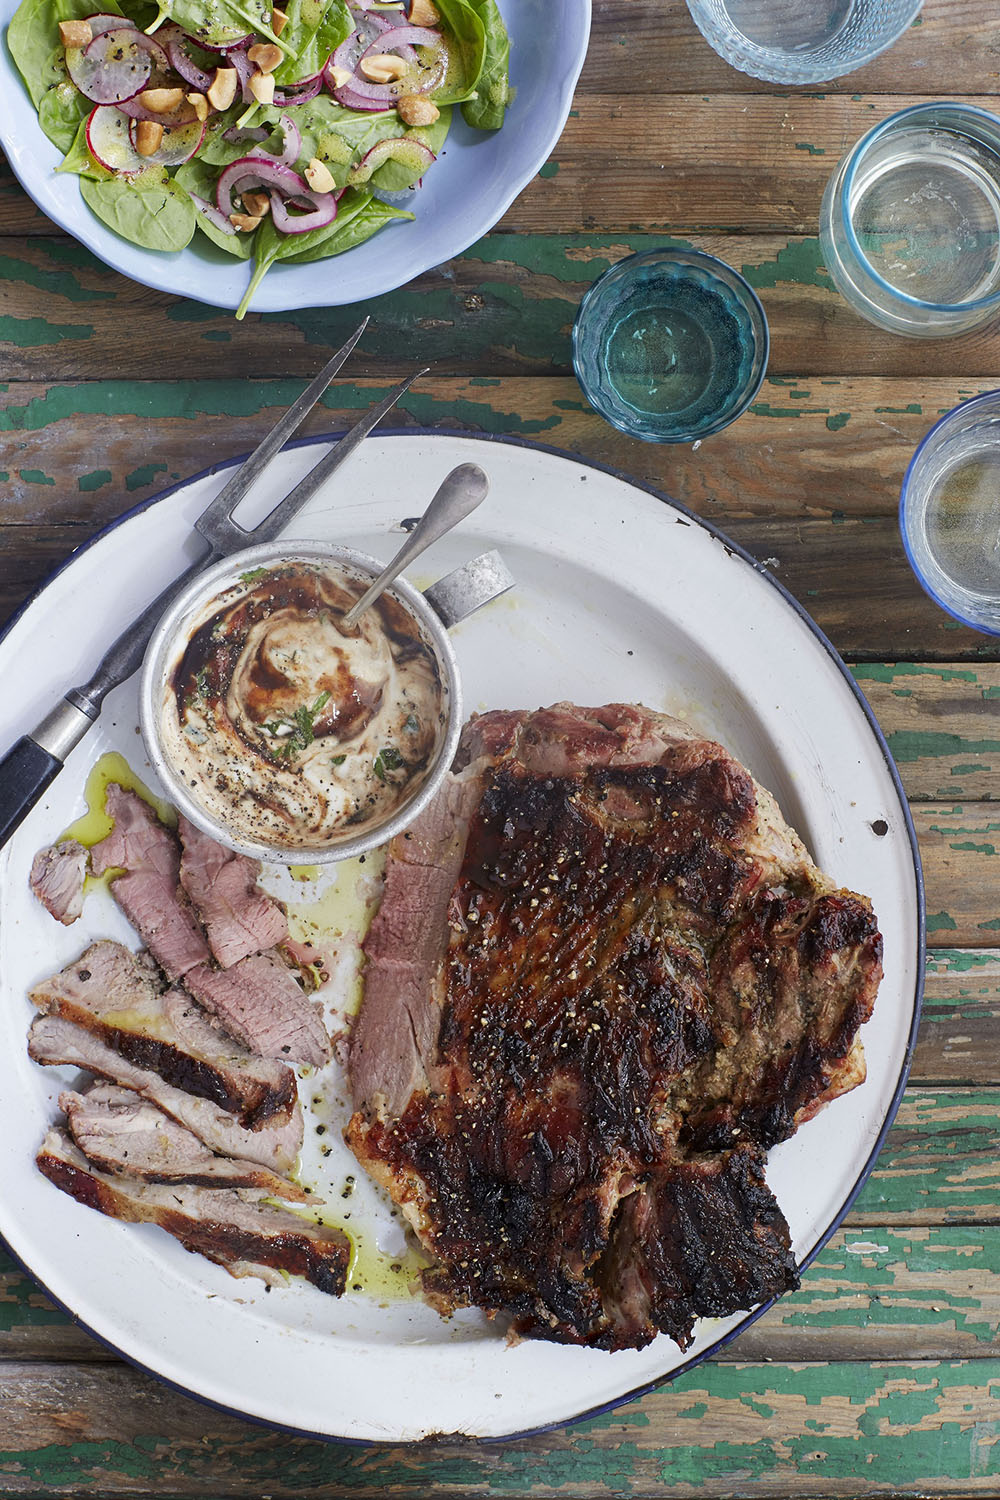 Spiced barbecue leg of lamb with tamarind and yogurt